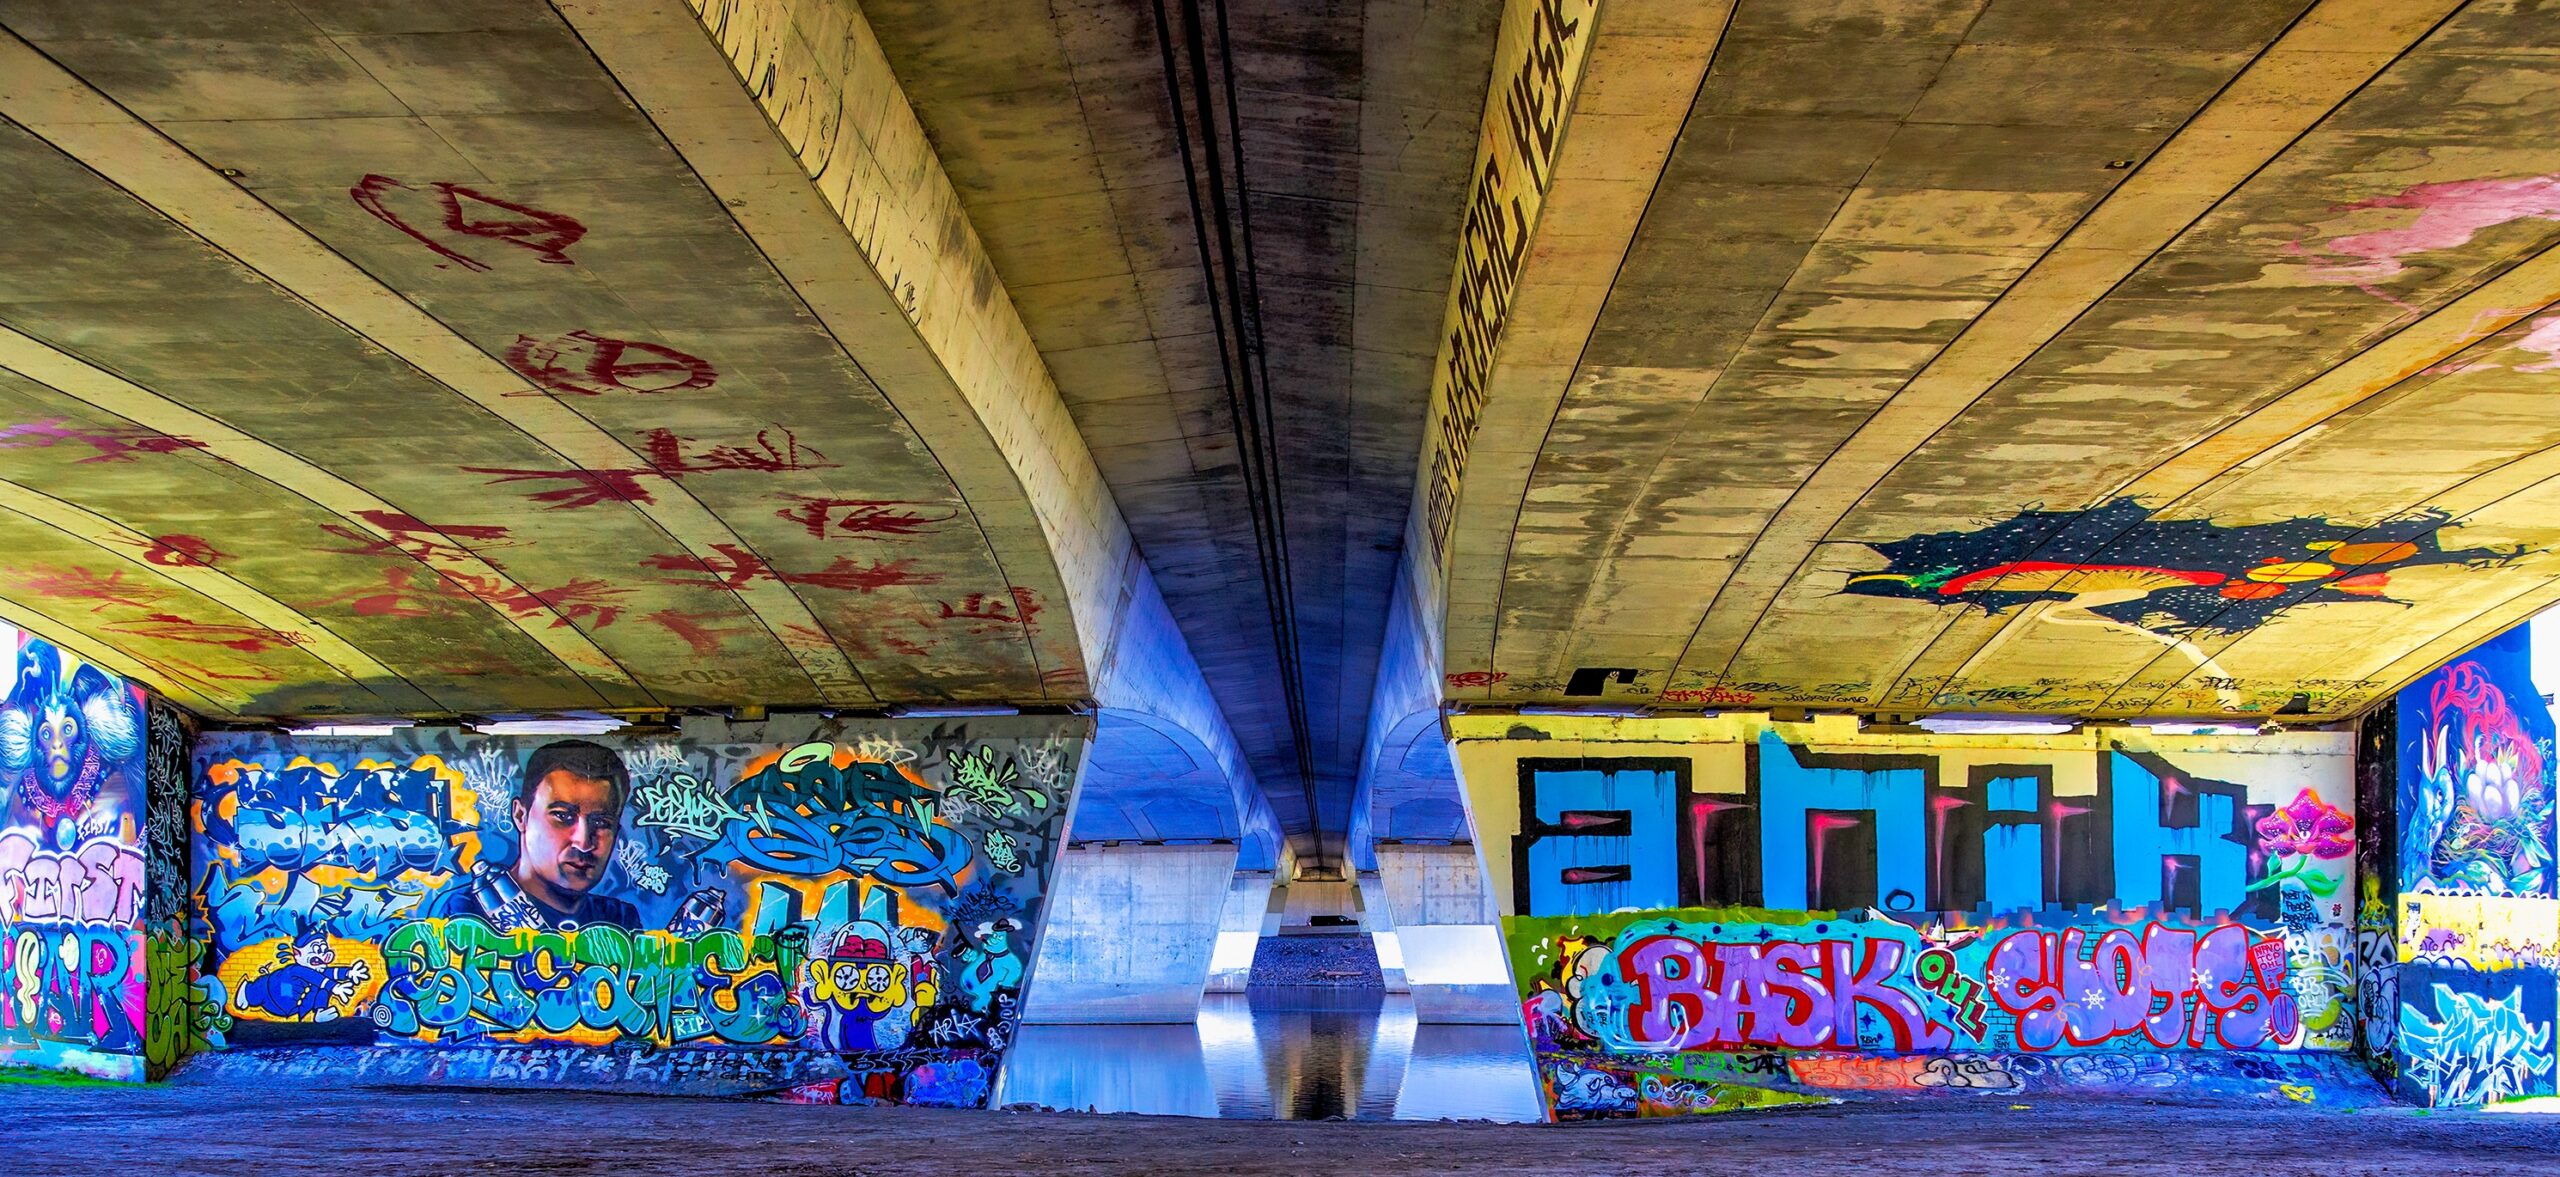 Reader-submitted graffiti & street art photos showcase a cacophony of color